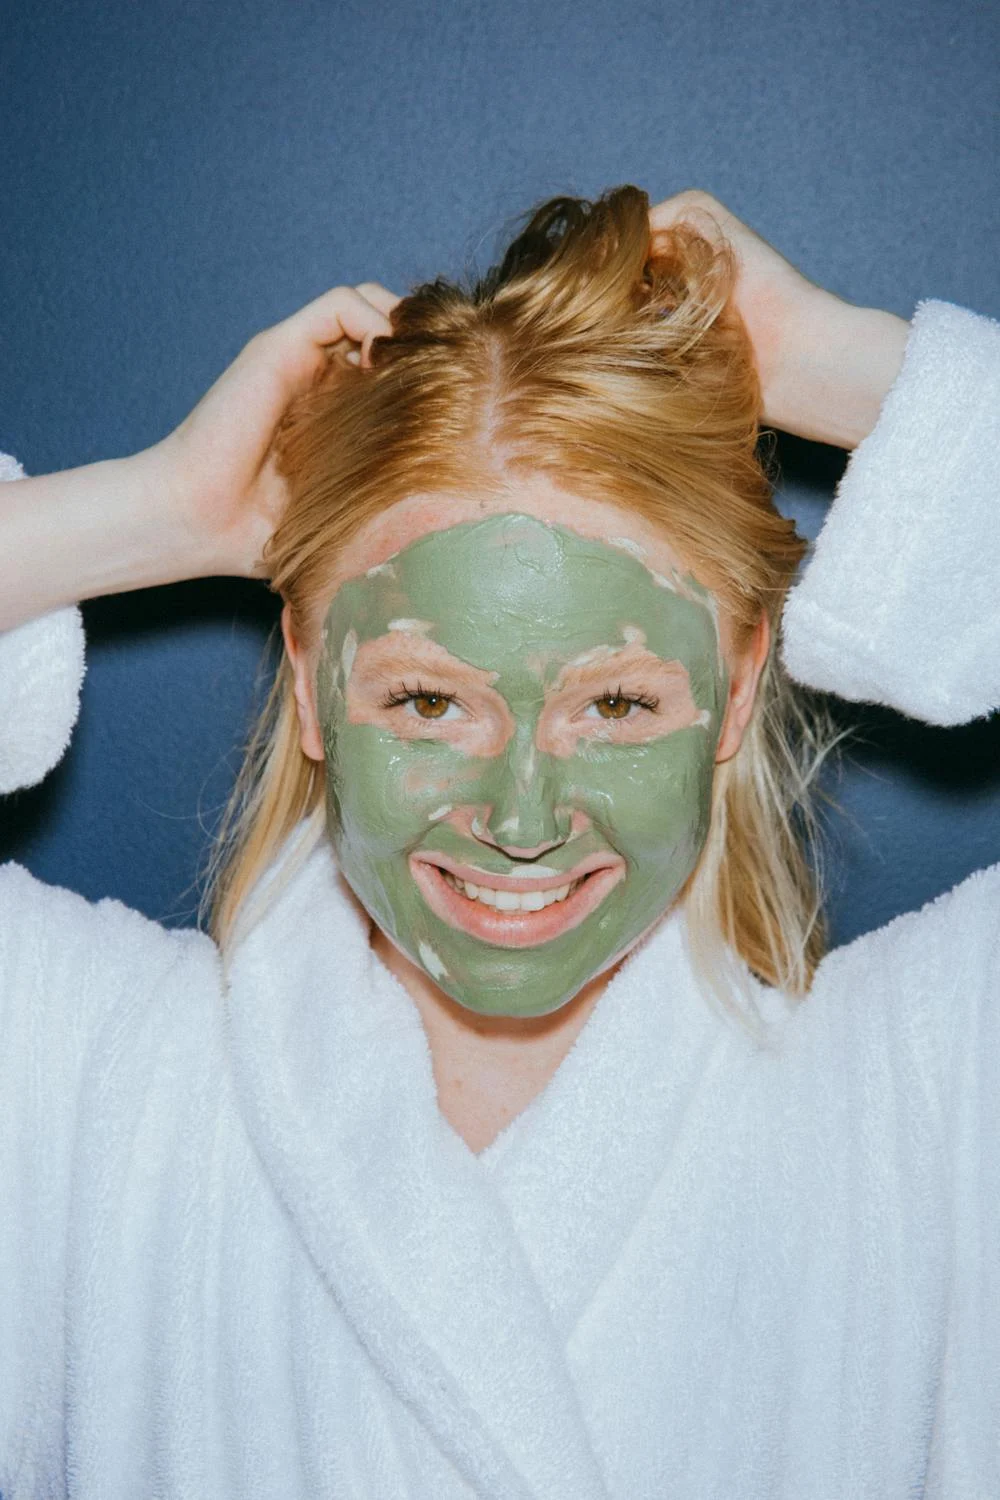 closeup of a smiling woman with a green face pack on, wearing a bathrobe